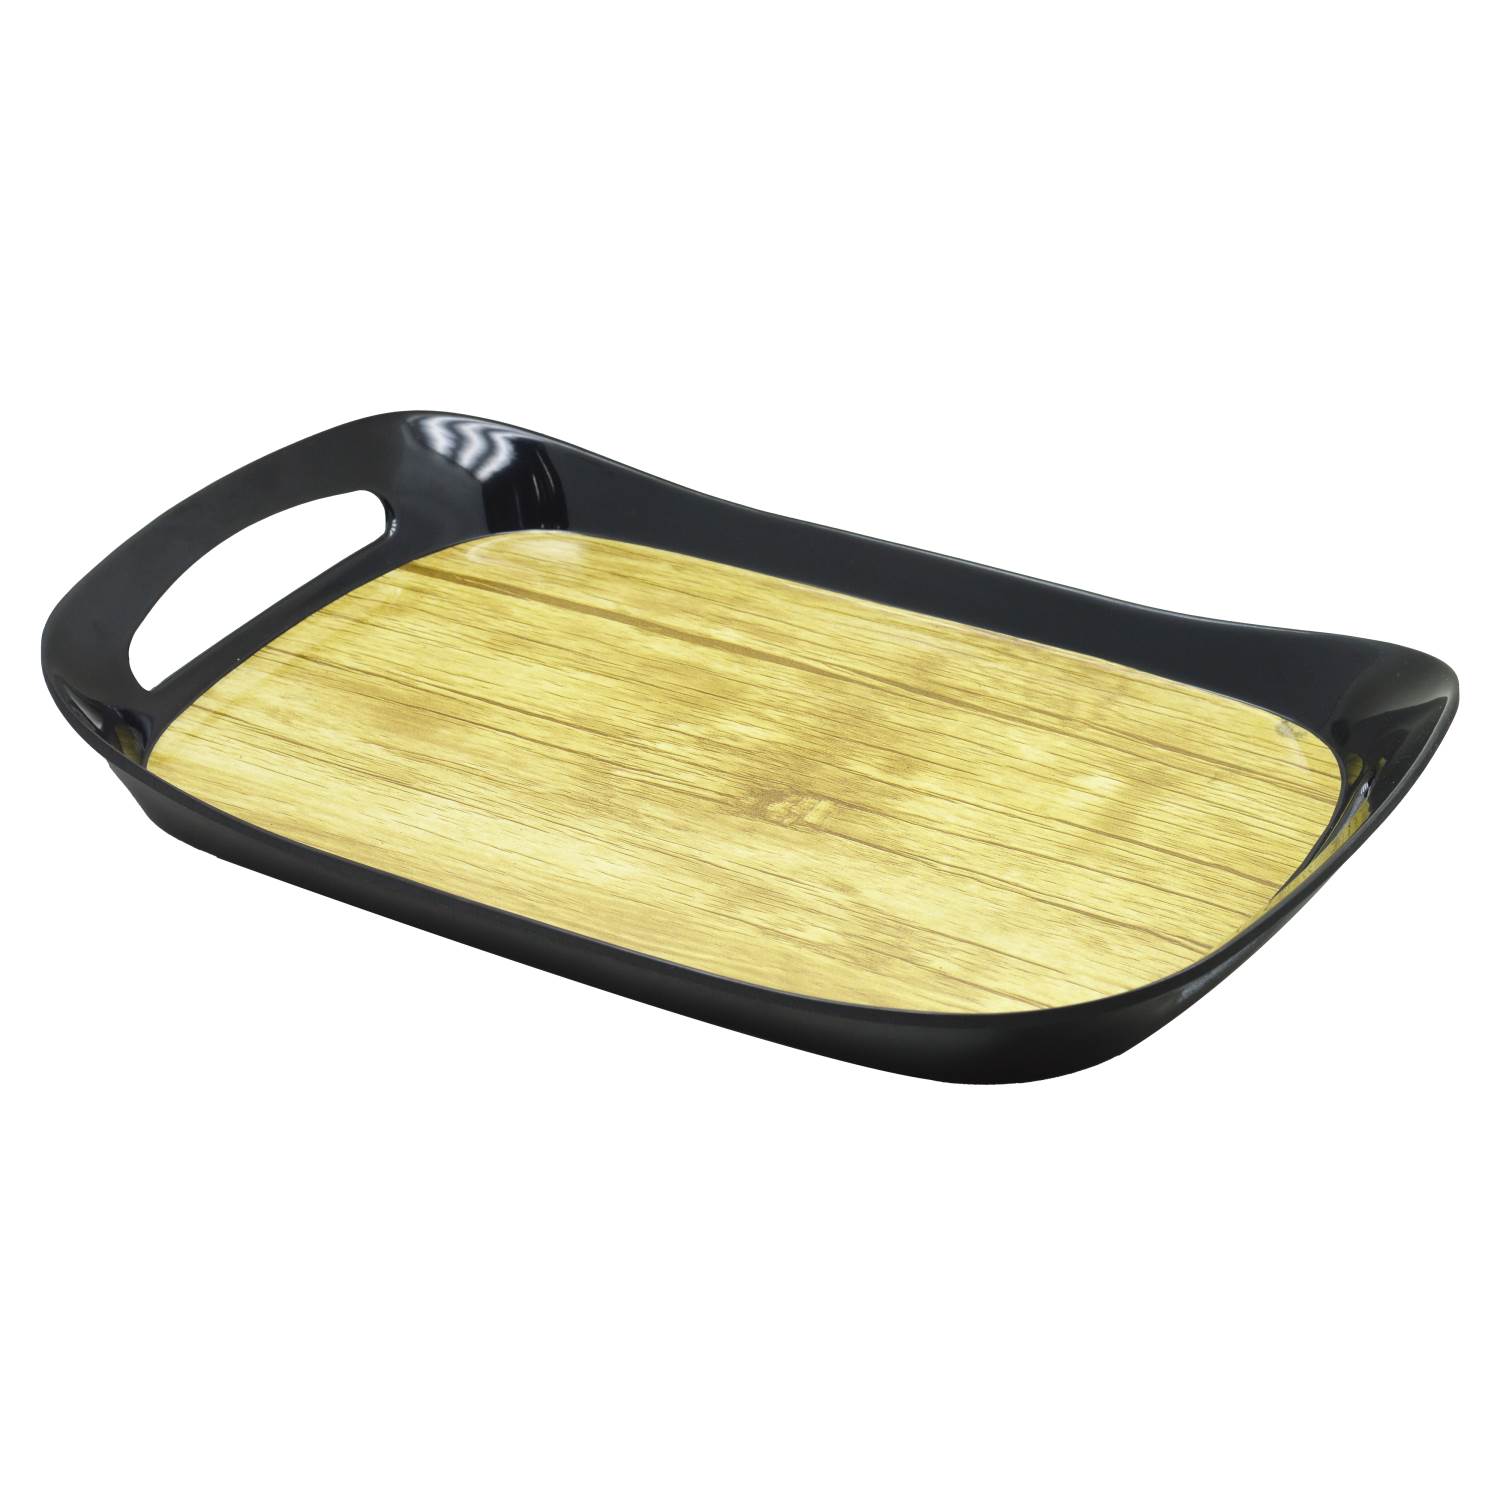 Rk Comfort Tray Large Bamboo, Dwt1072Bmb, 16.25" X 10.25"